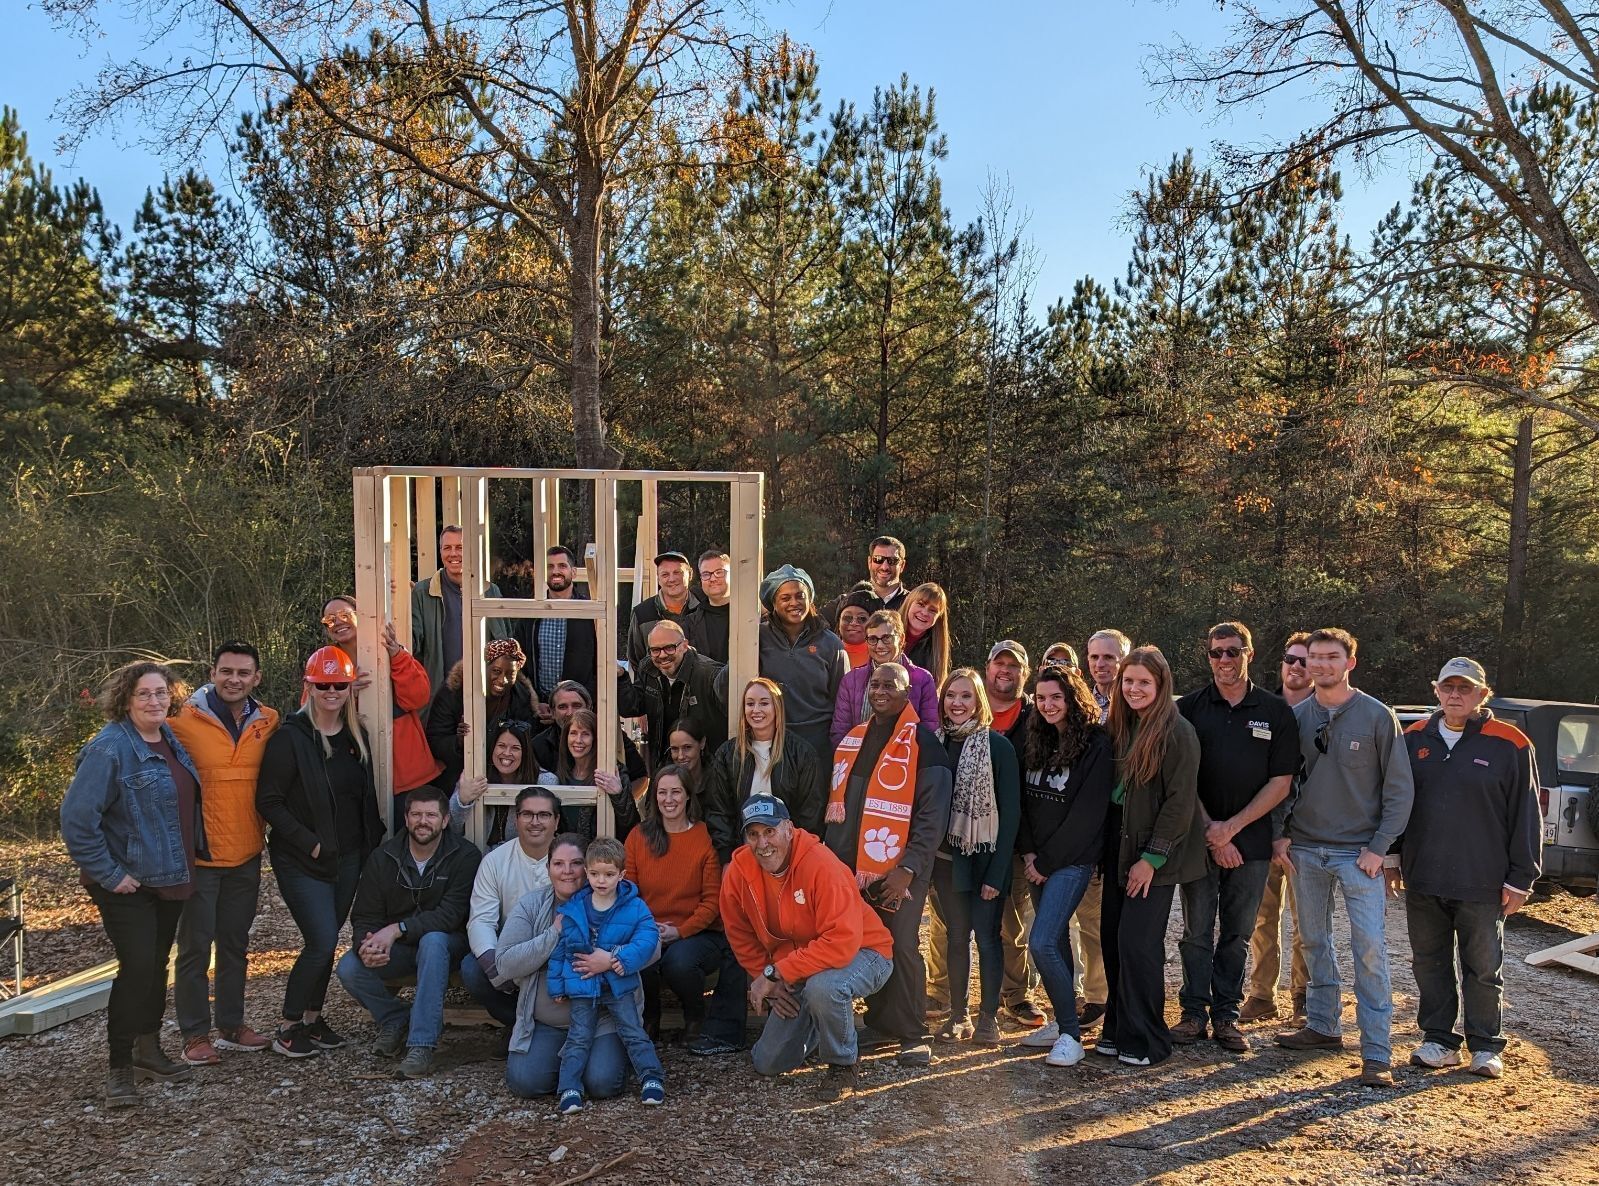 A group of people stand proudly in front of a playhouse under construction